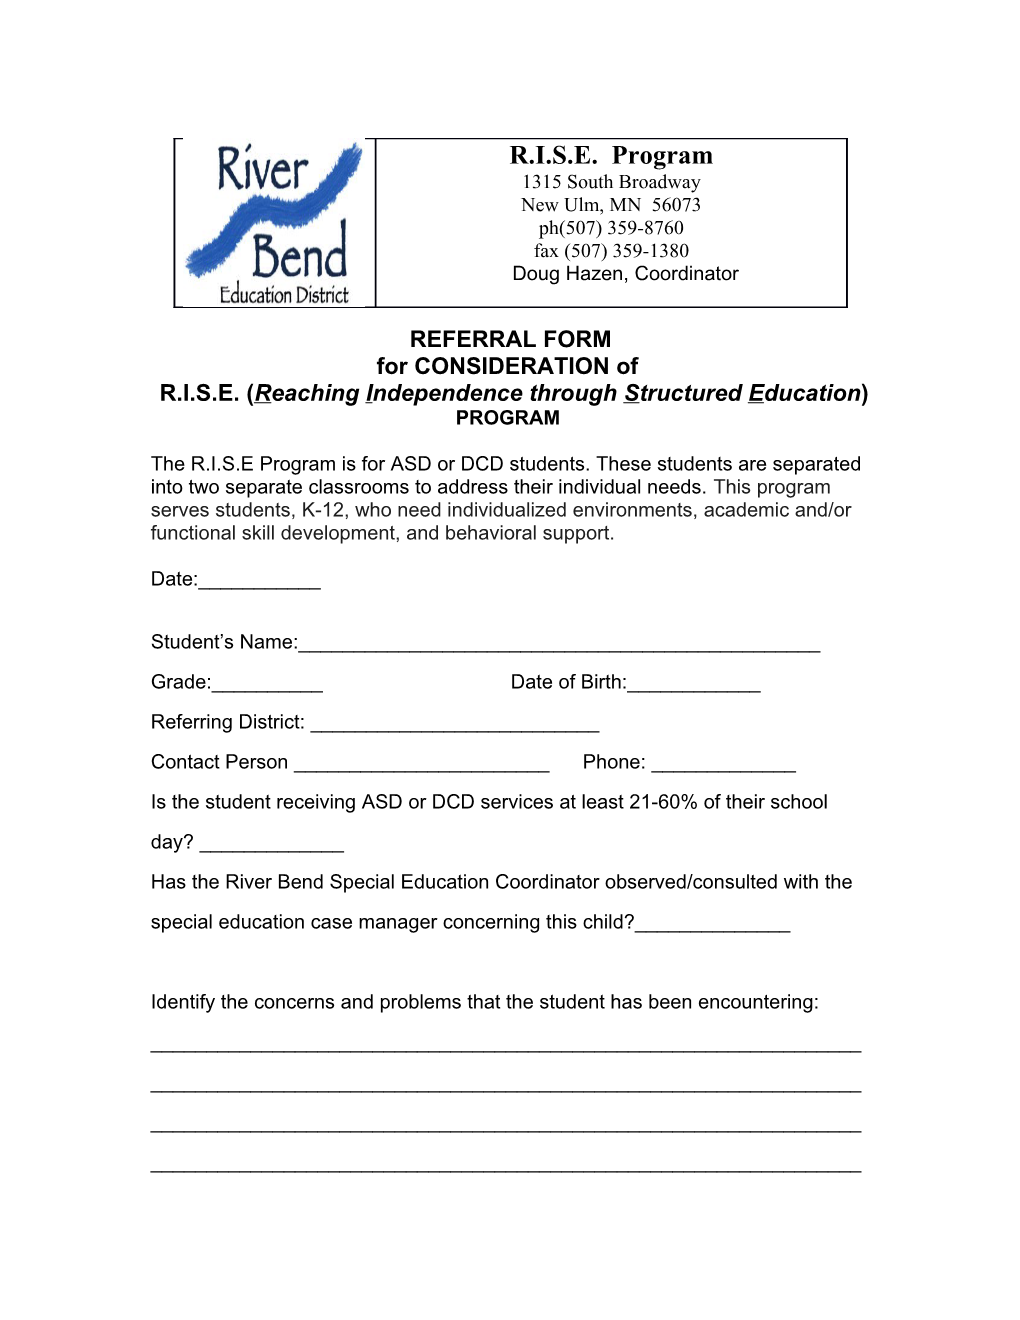 REFERRAL FORM for CONSIDERATION of R.I.S.E. (Reaching Independence Through Structured Education)